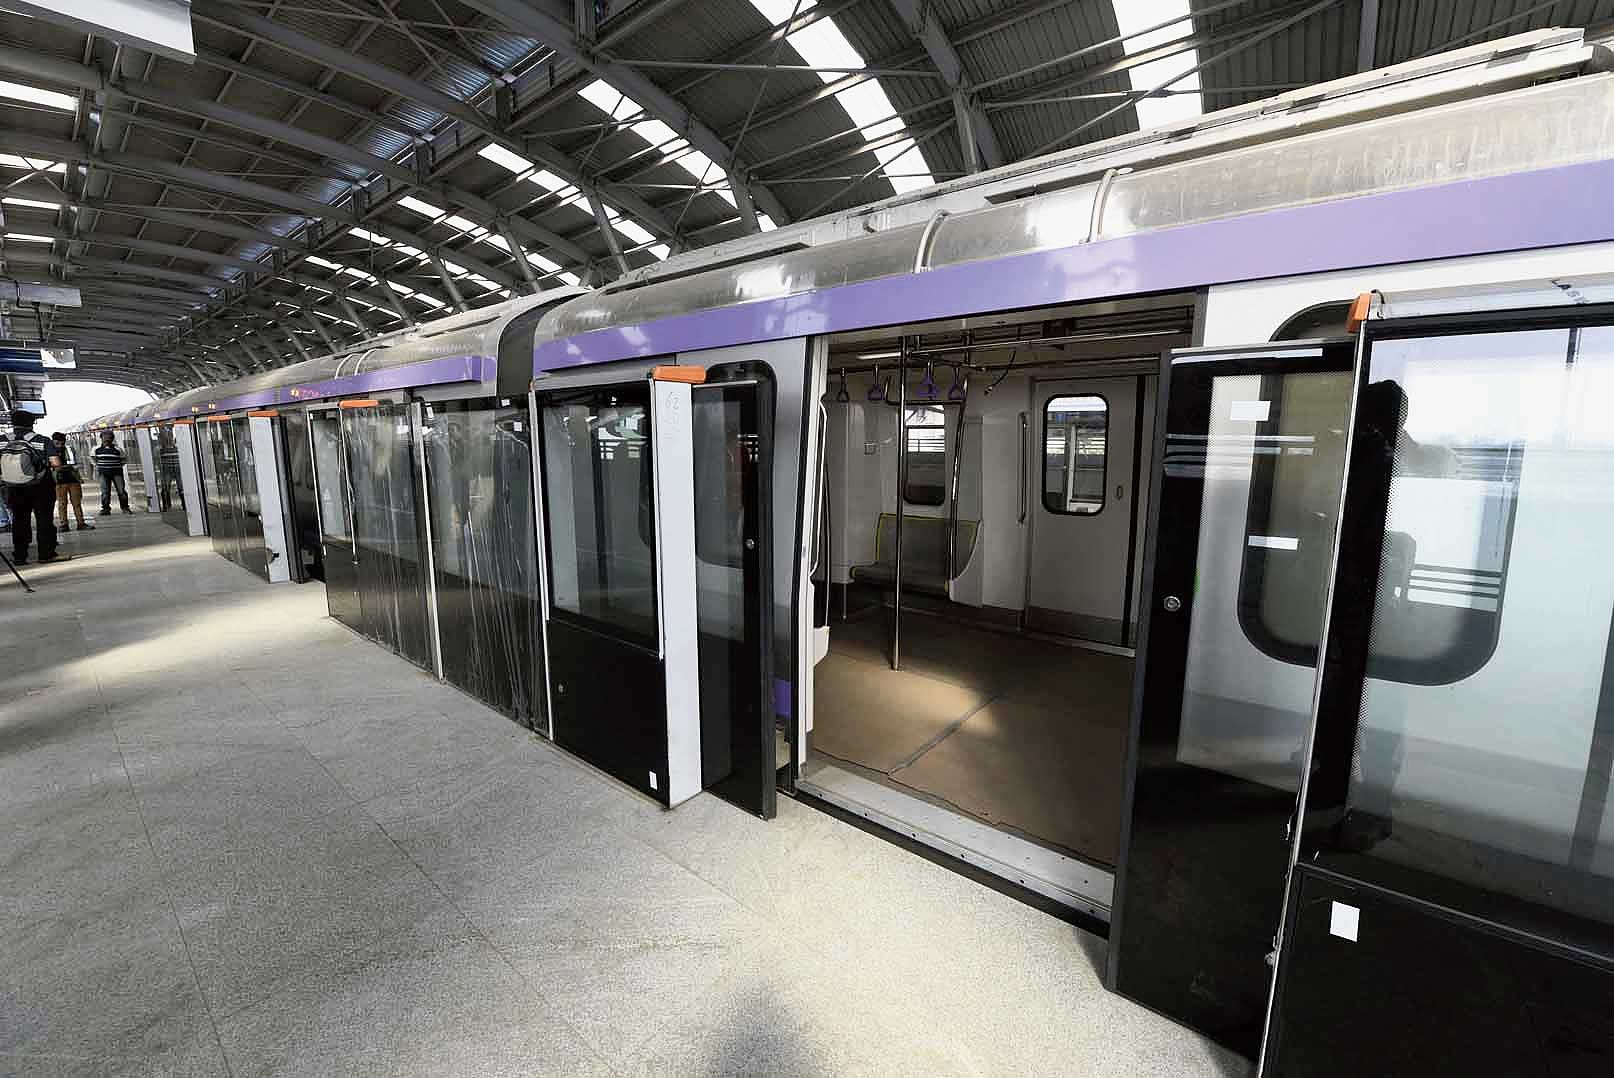 All the platform screens, meant to act as a safety barrier, and the train doors open in synchronisation. 